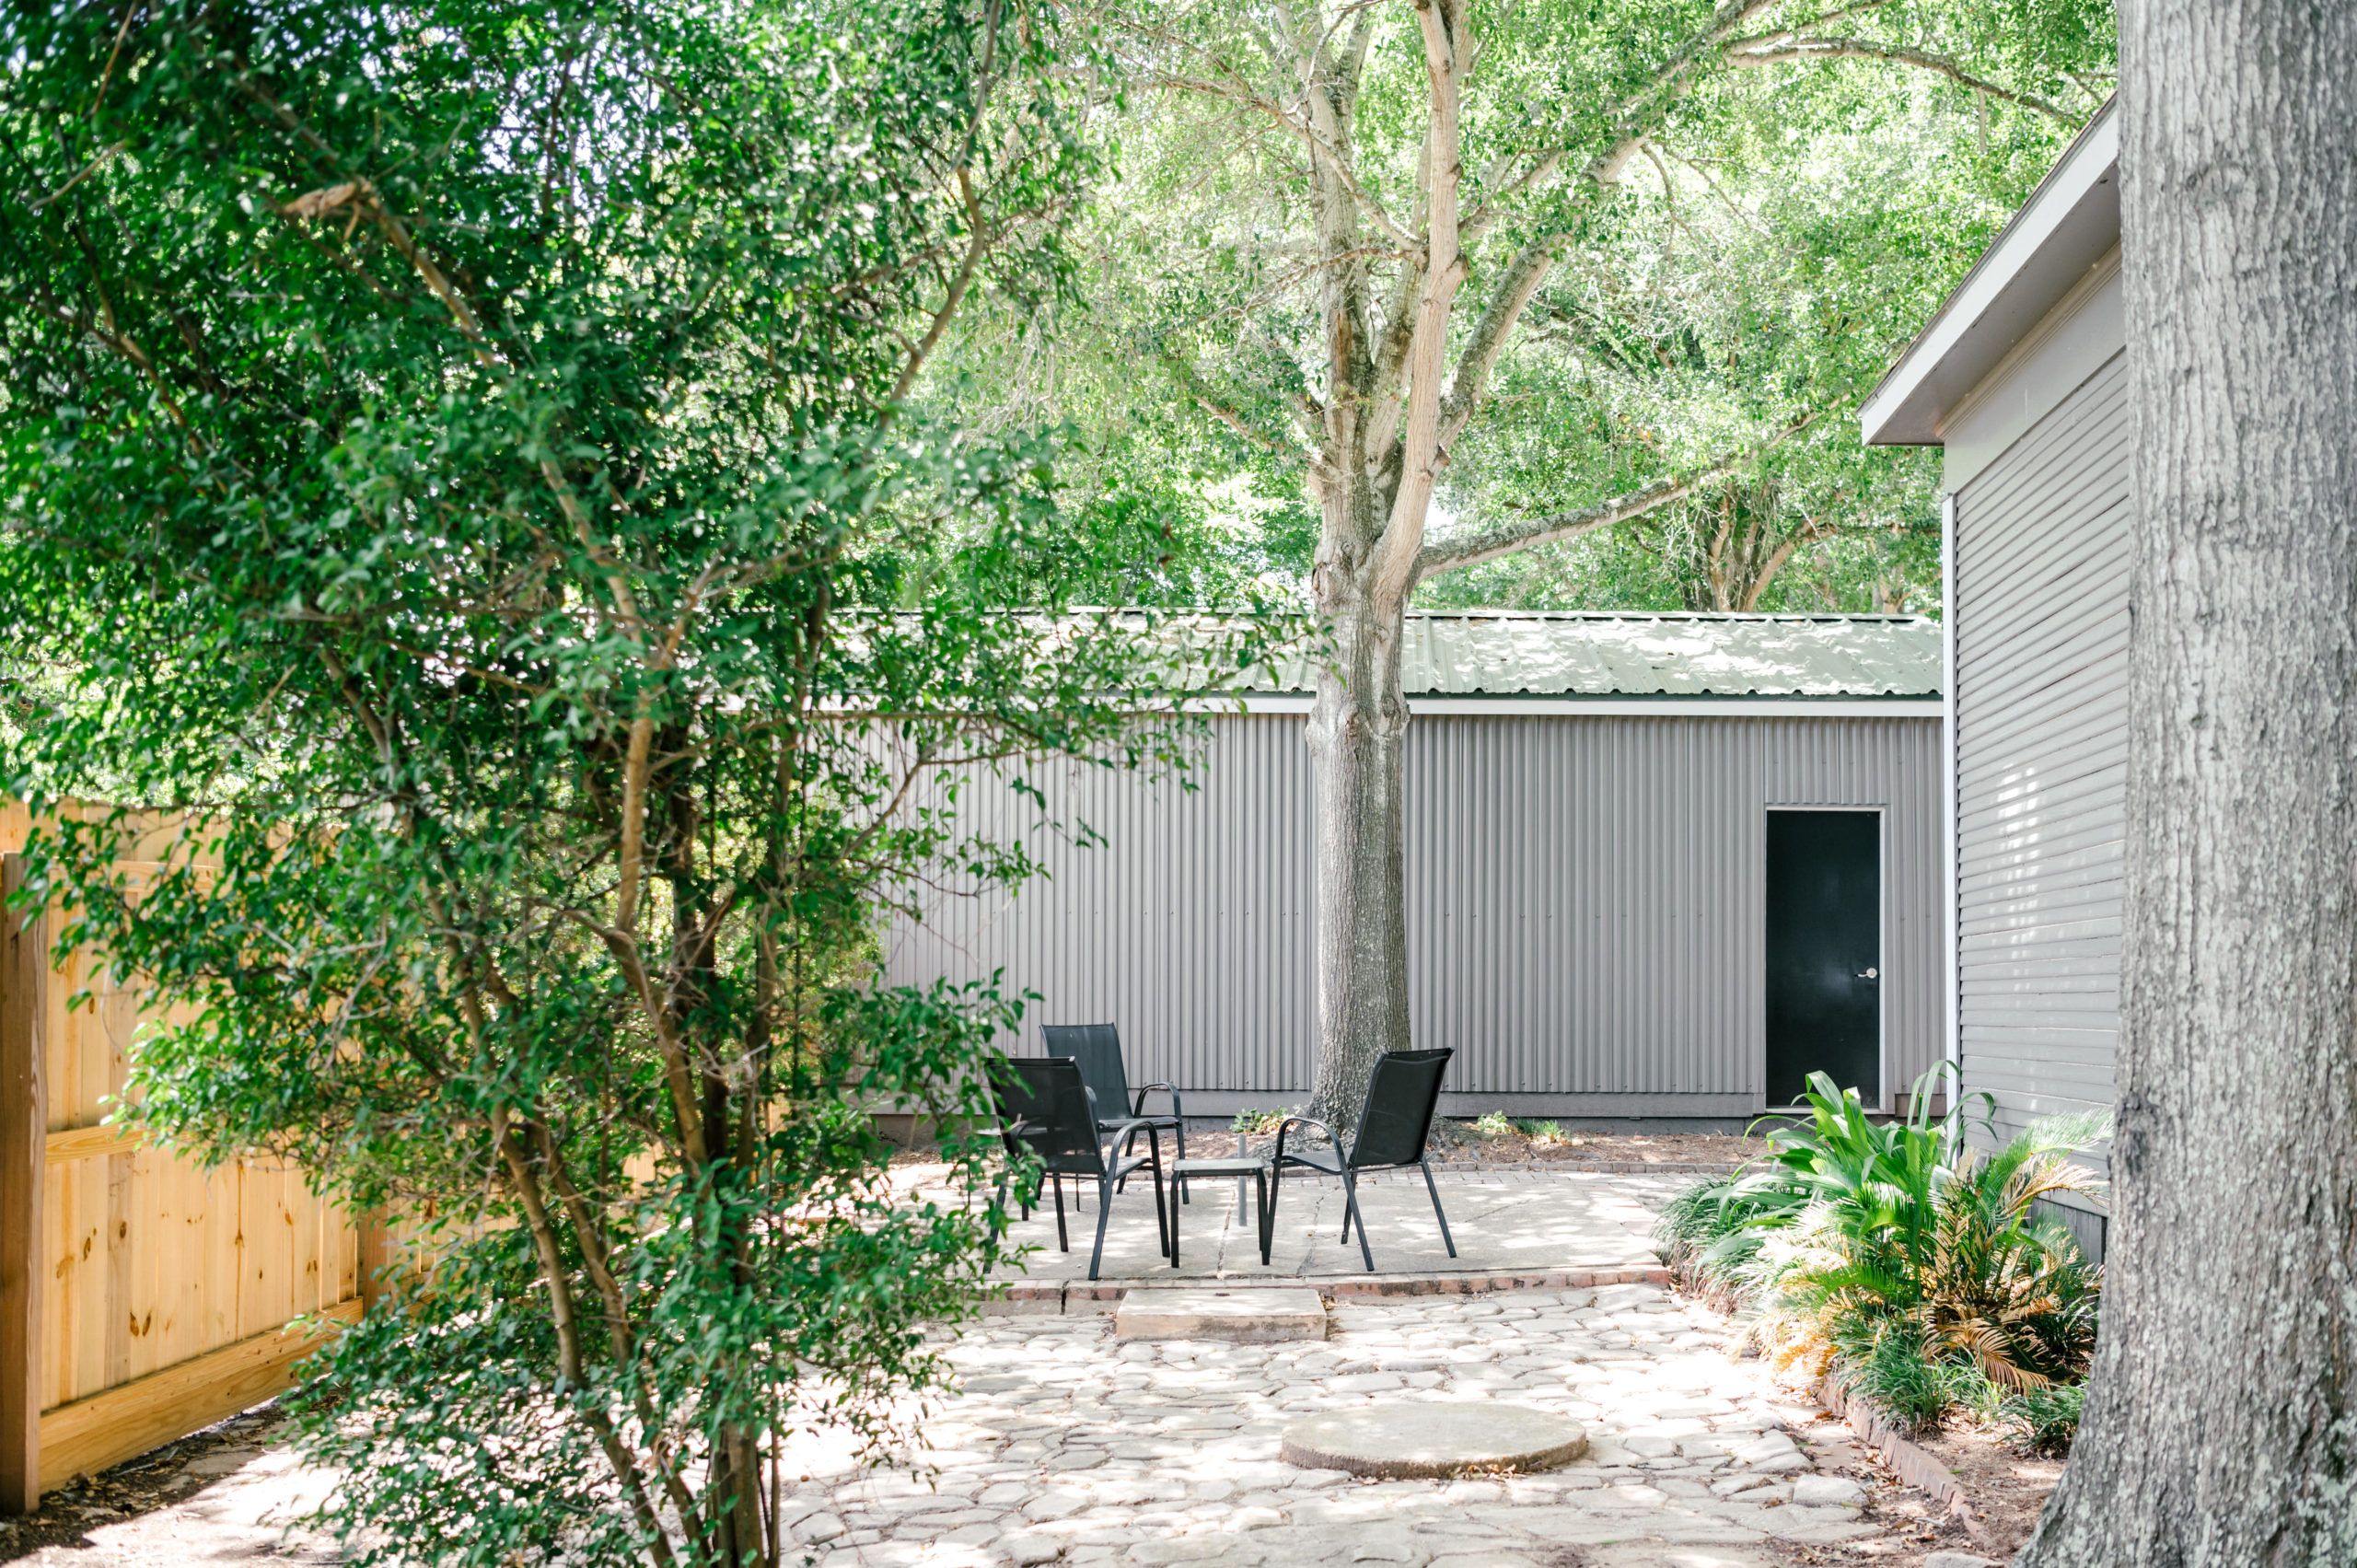 Backyard with outside metal chairs and table surrounded by trees